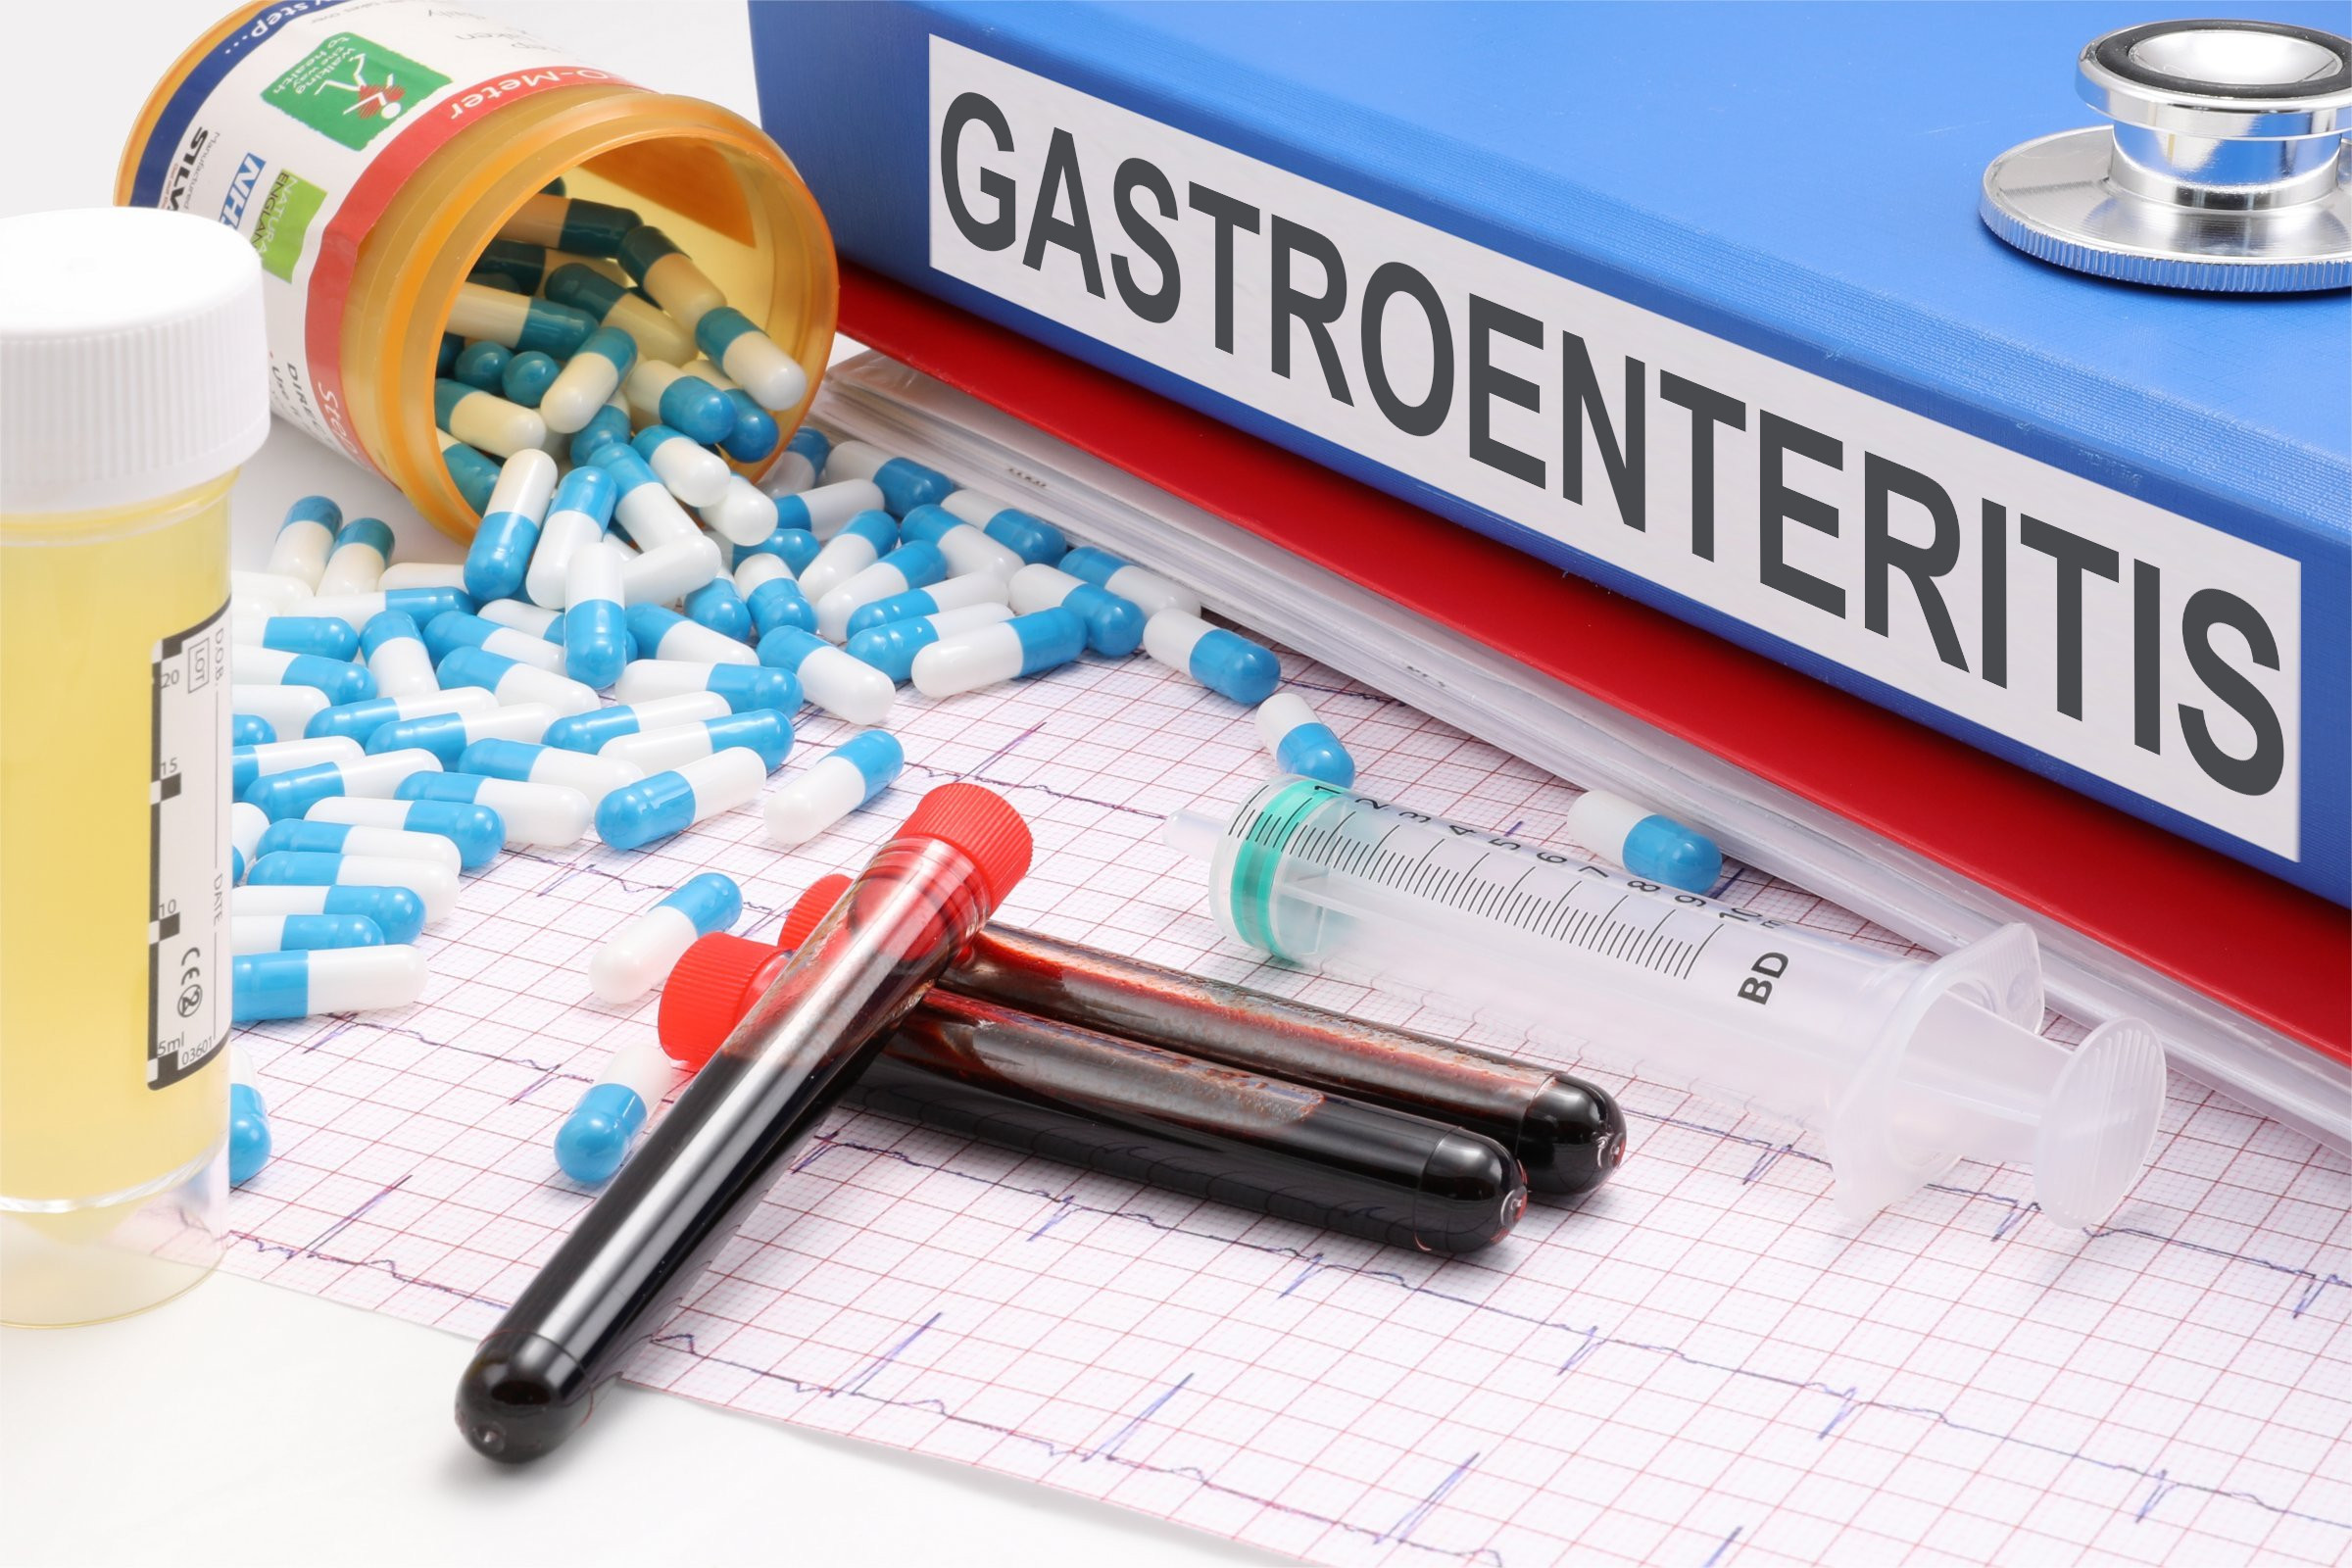 Gastroenteritis - Free of Charge Creative Commons Medical image